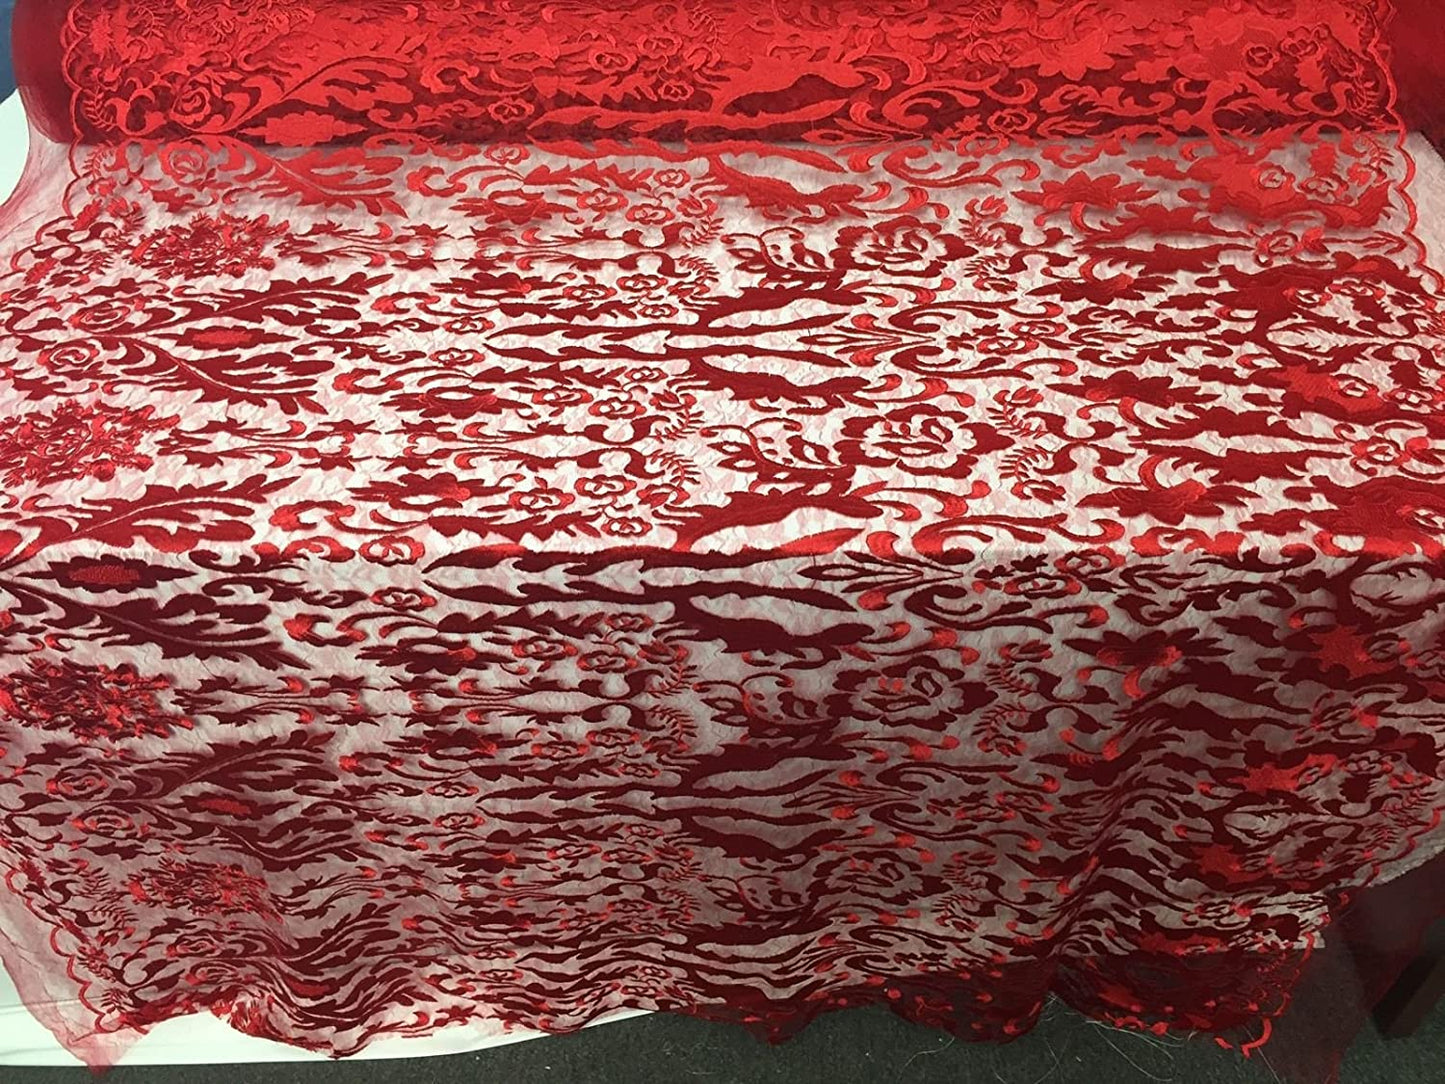 Red Damask Design Embroider On A 2 Way Stretch Mesh Lace Fabric-new-